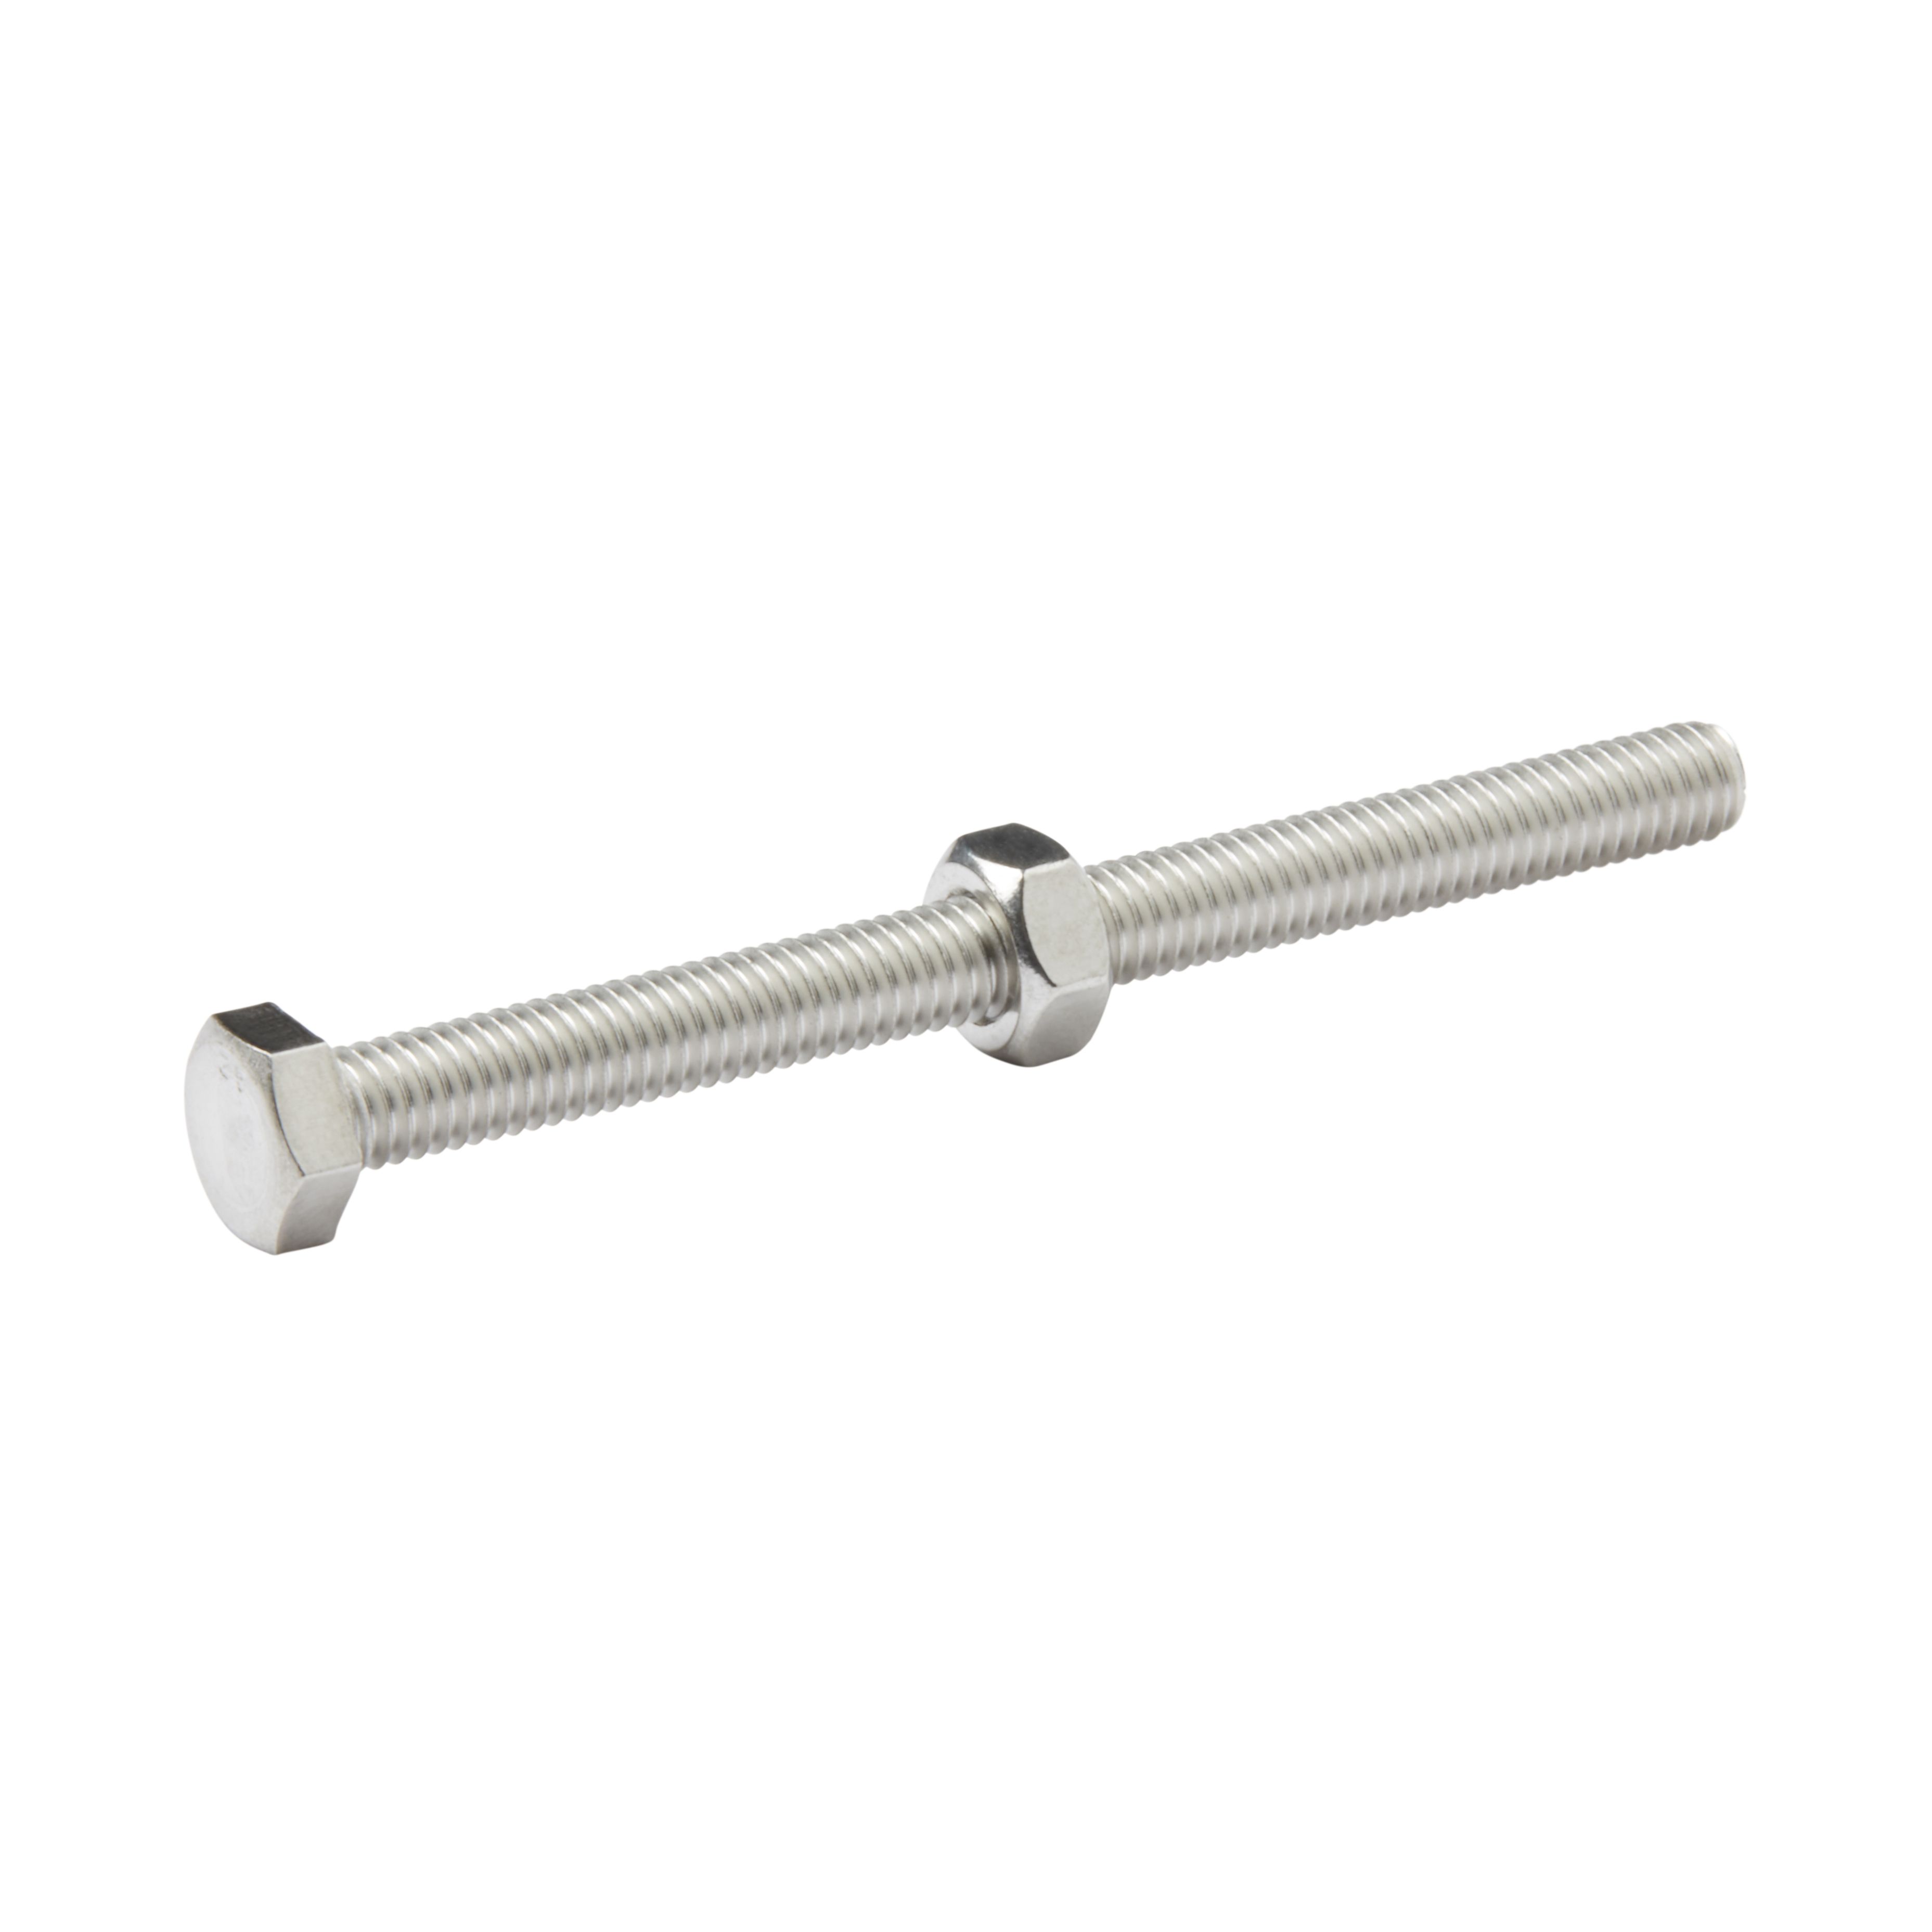 Diall M6 Hex Stainless steel Bolt & nut (L)75mm (Dia)6mm, Pack of 10